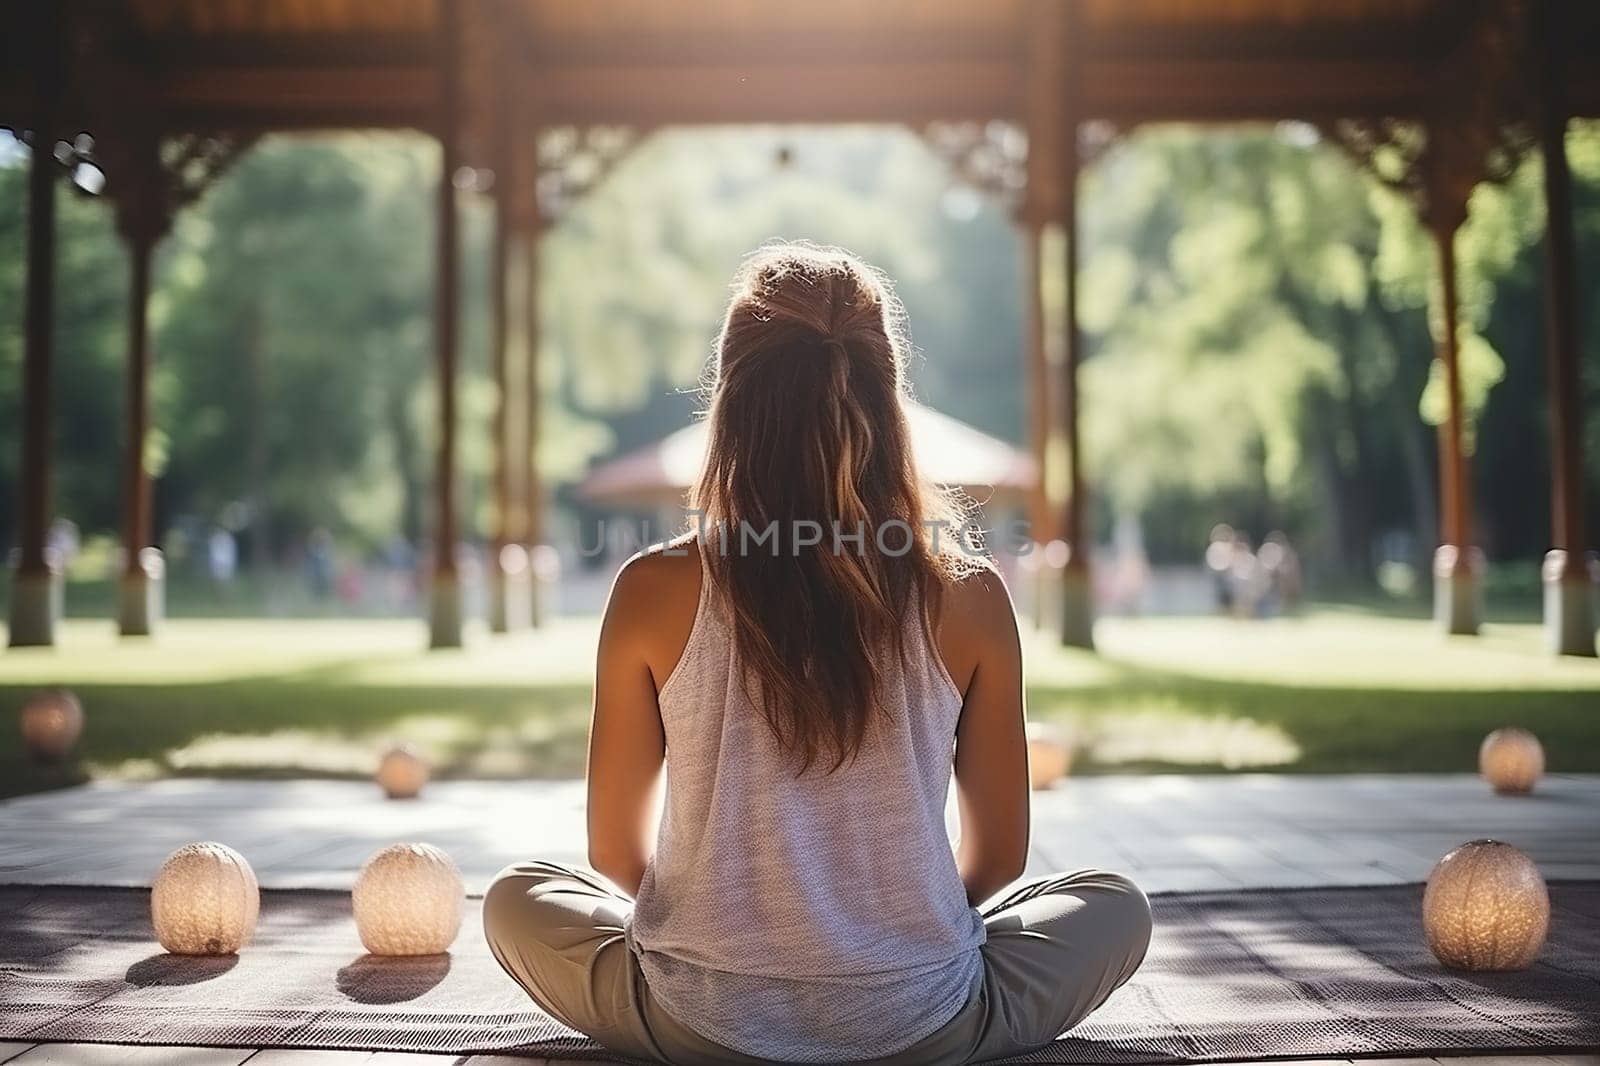 Rear view of a woman sitting in the lotus position in the park.